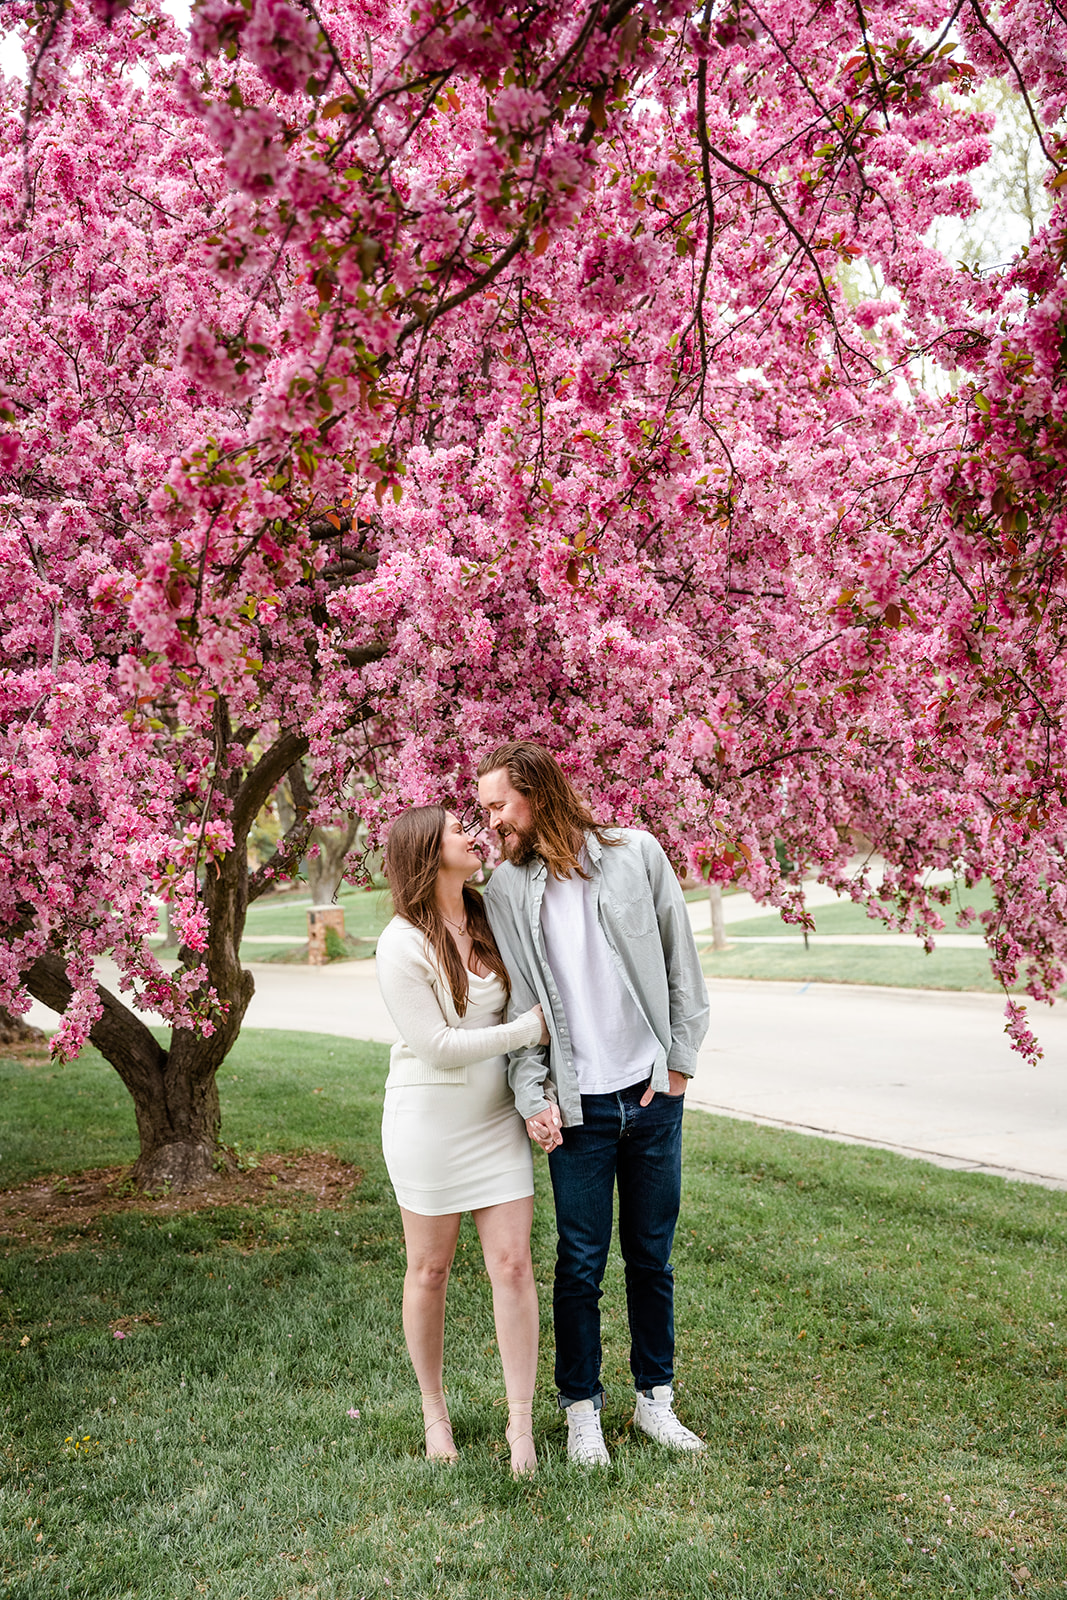 Full body crop of couple kissing by blooming tree